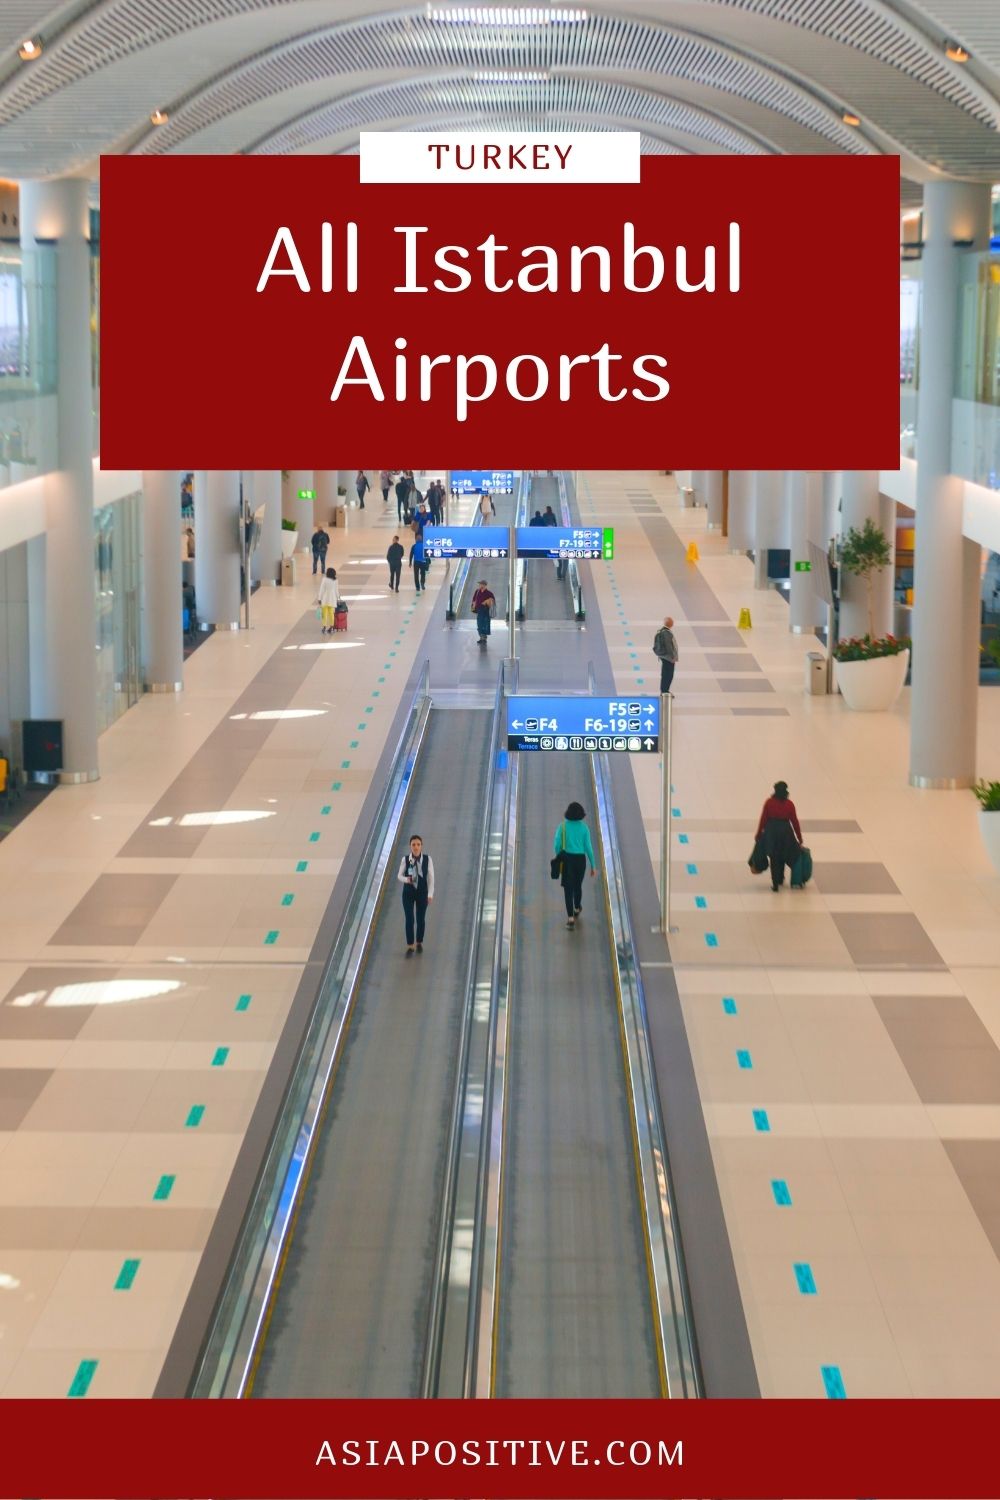 All Istanbul Airports: Names, Locations, Taxi, and Hotels